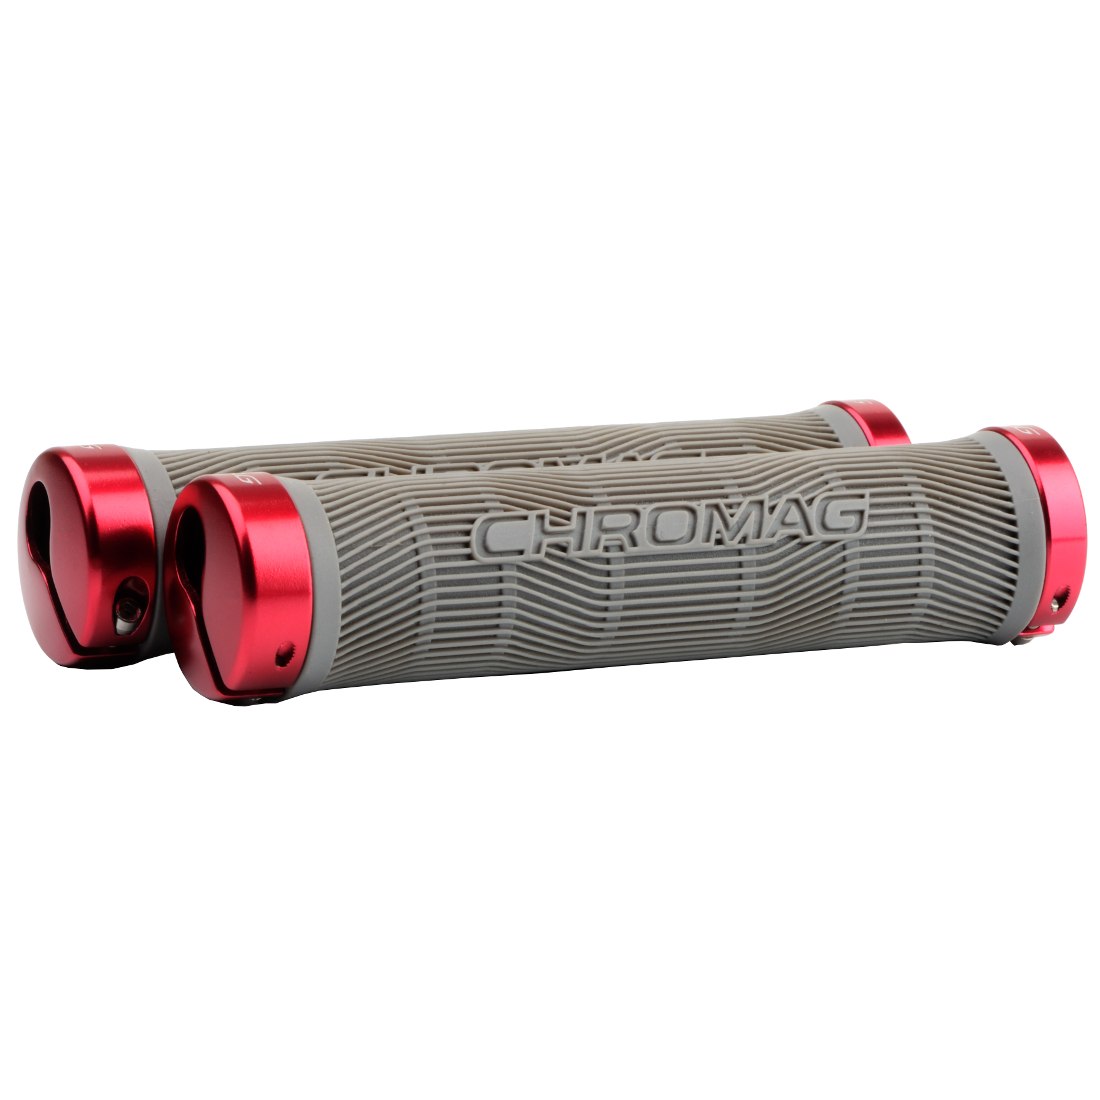 Picture of CHROMAG Palmskin Grip Handlebar Grips - grey/red